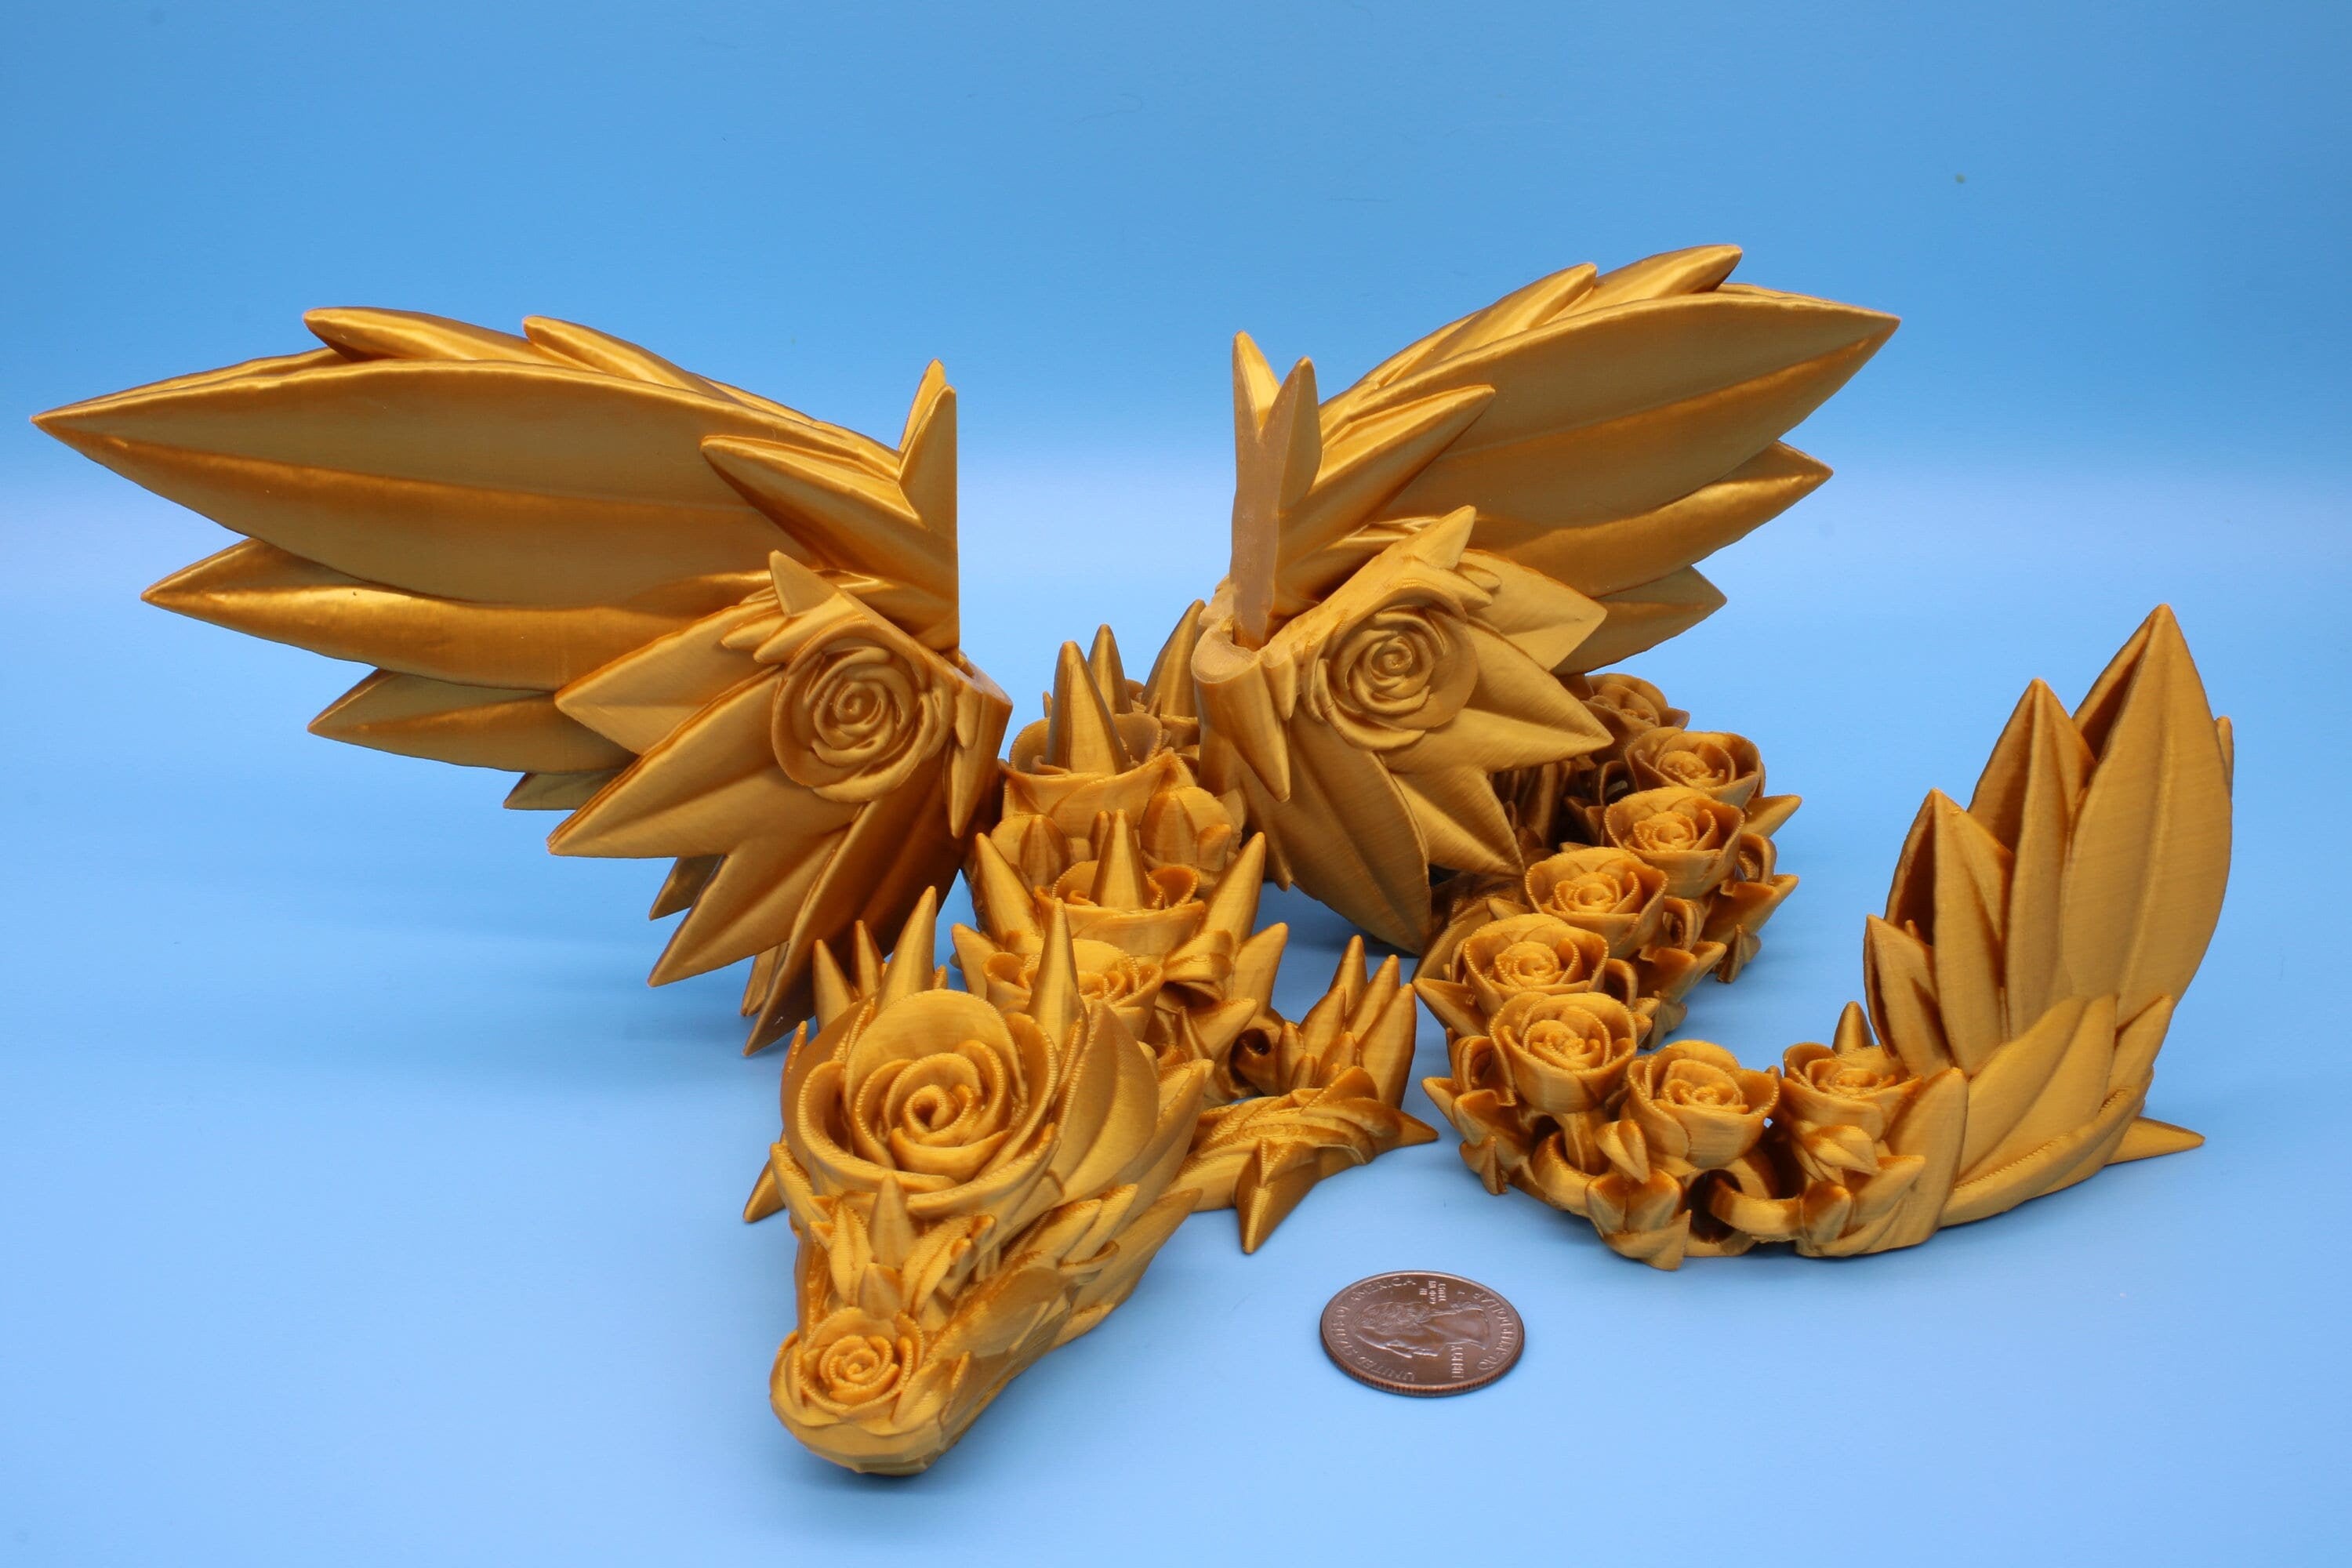 Gold Rose Wing Articulating Dragon | 3D Printed Fidget | Flexi Toy | Adult Fidget Toy | Sensory Desk Toy | 19 in. | Valentines Day